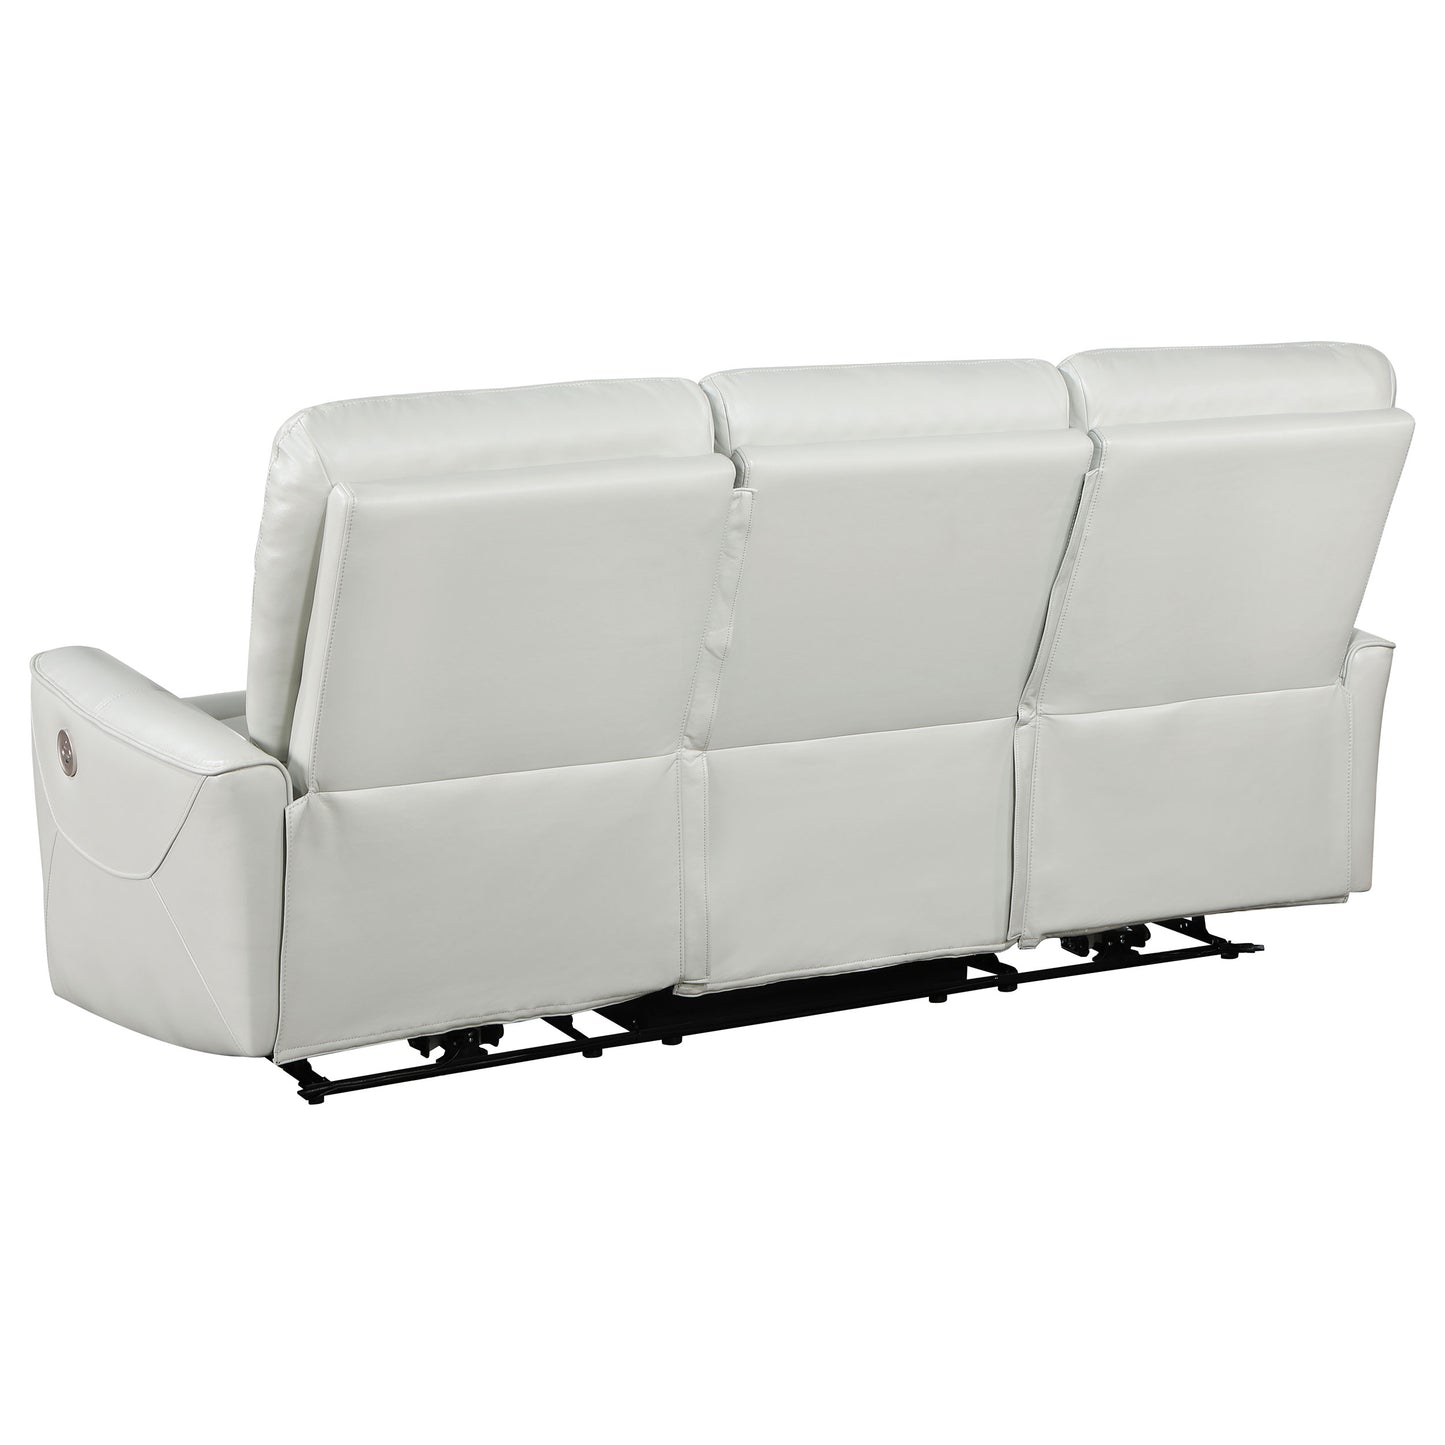 Greenfield 2-piece Upholstered Power Reclining Sofa Set Ivory